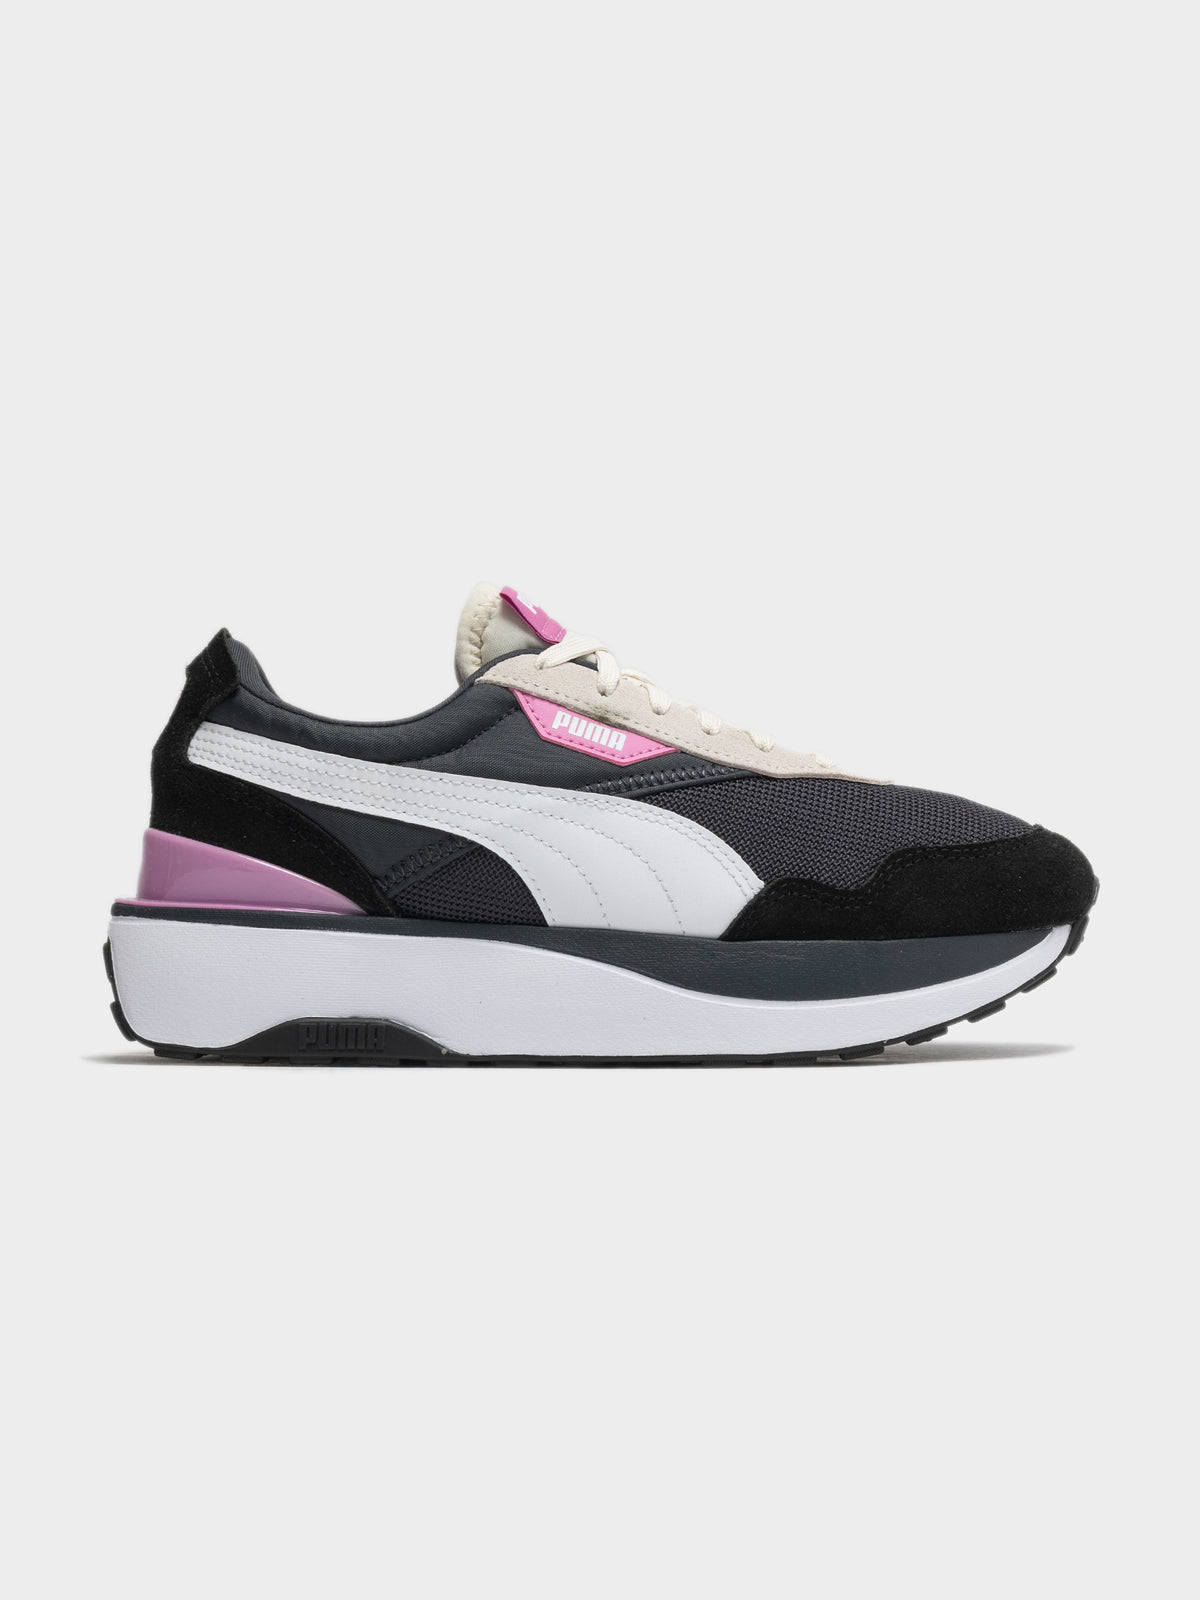 Womens Cruise Rider Sneaker in Black &amp; Pink